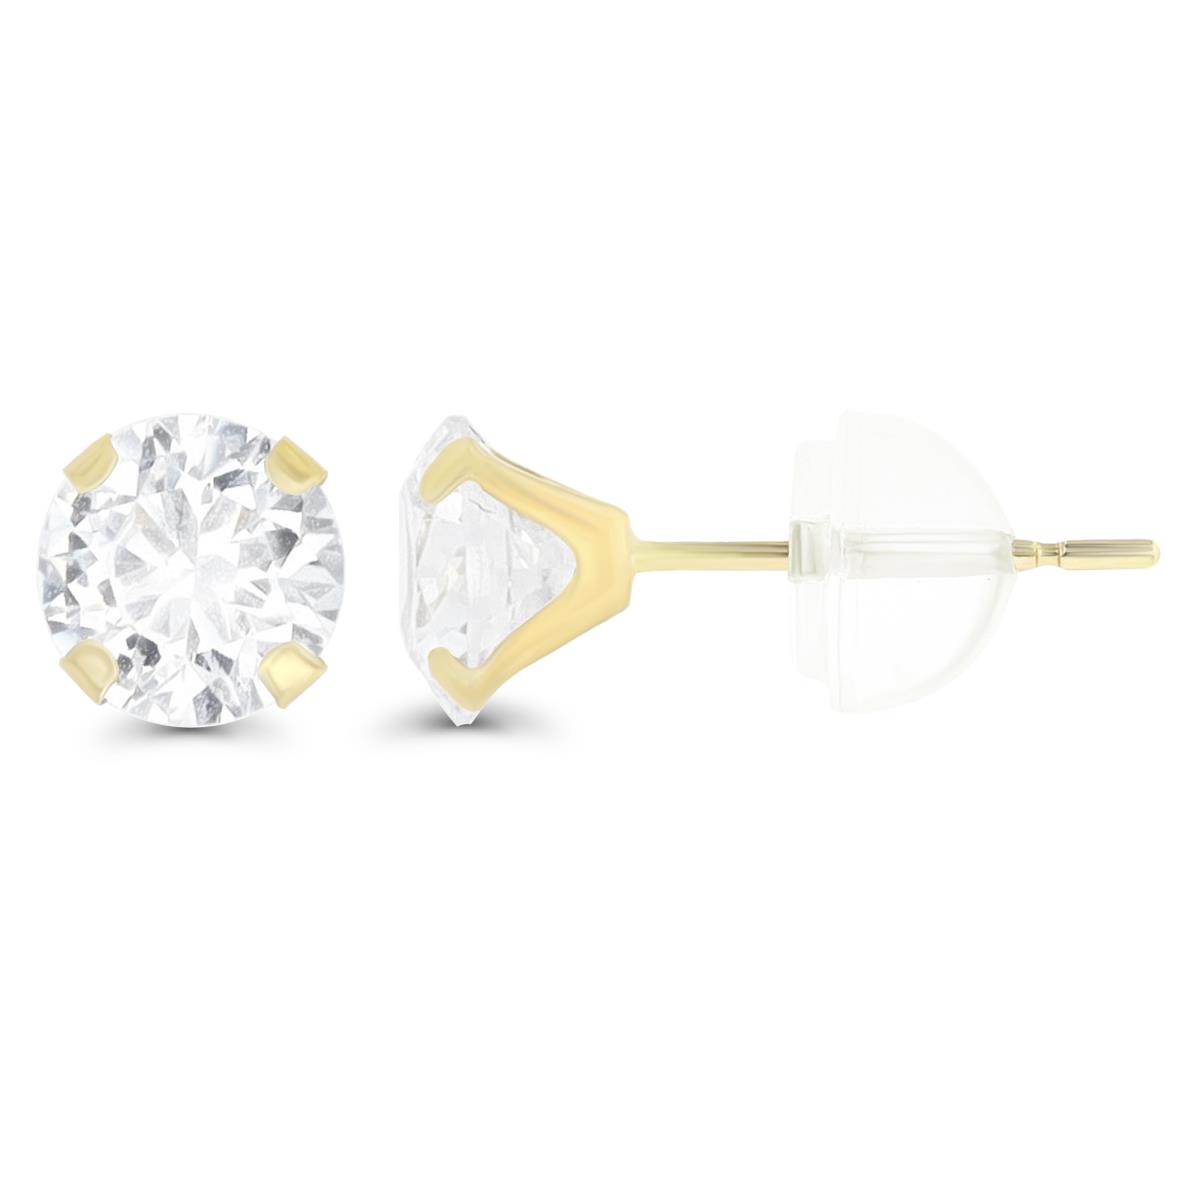 14K Yellow Gold 6mm Martini Round Cut Solitaire Stud Earring